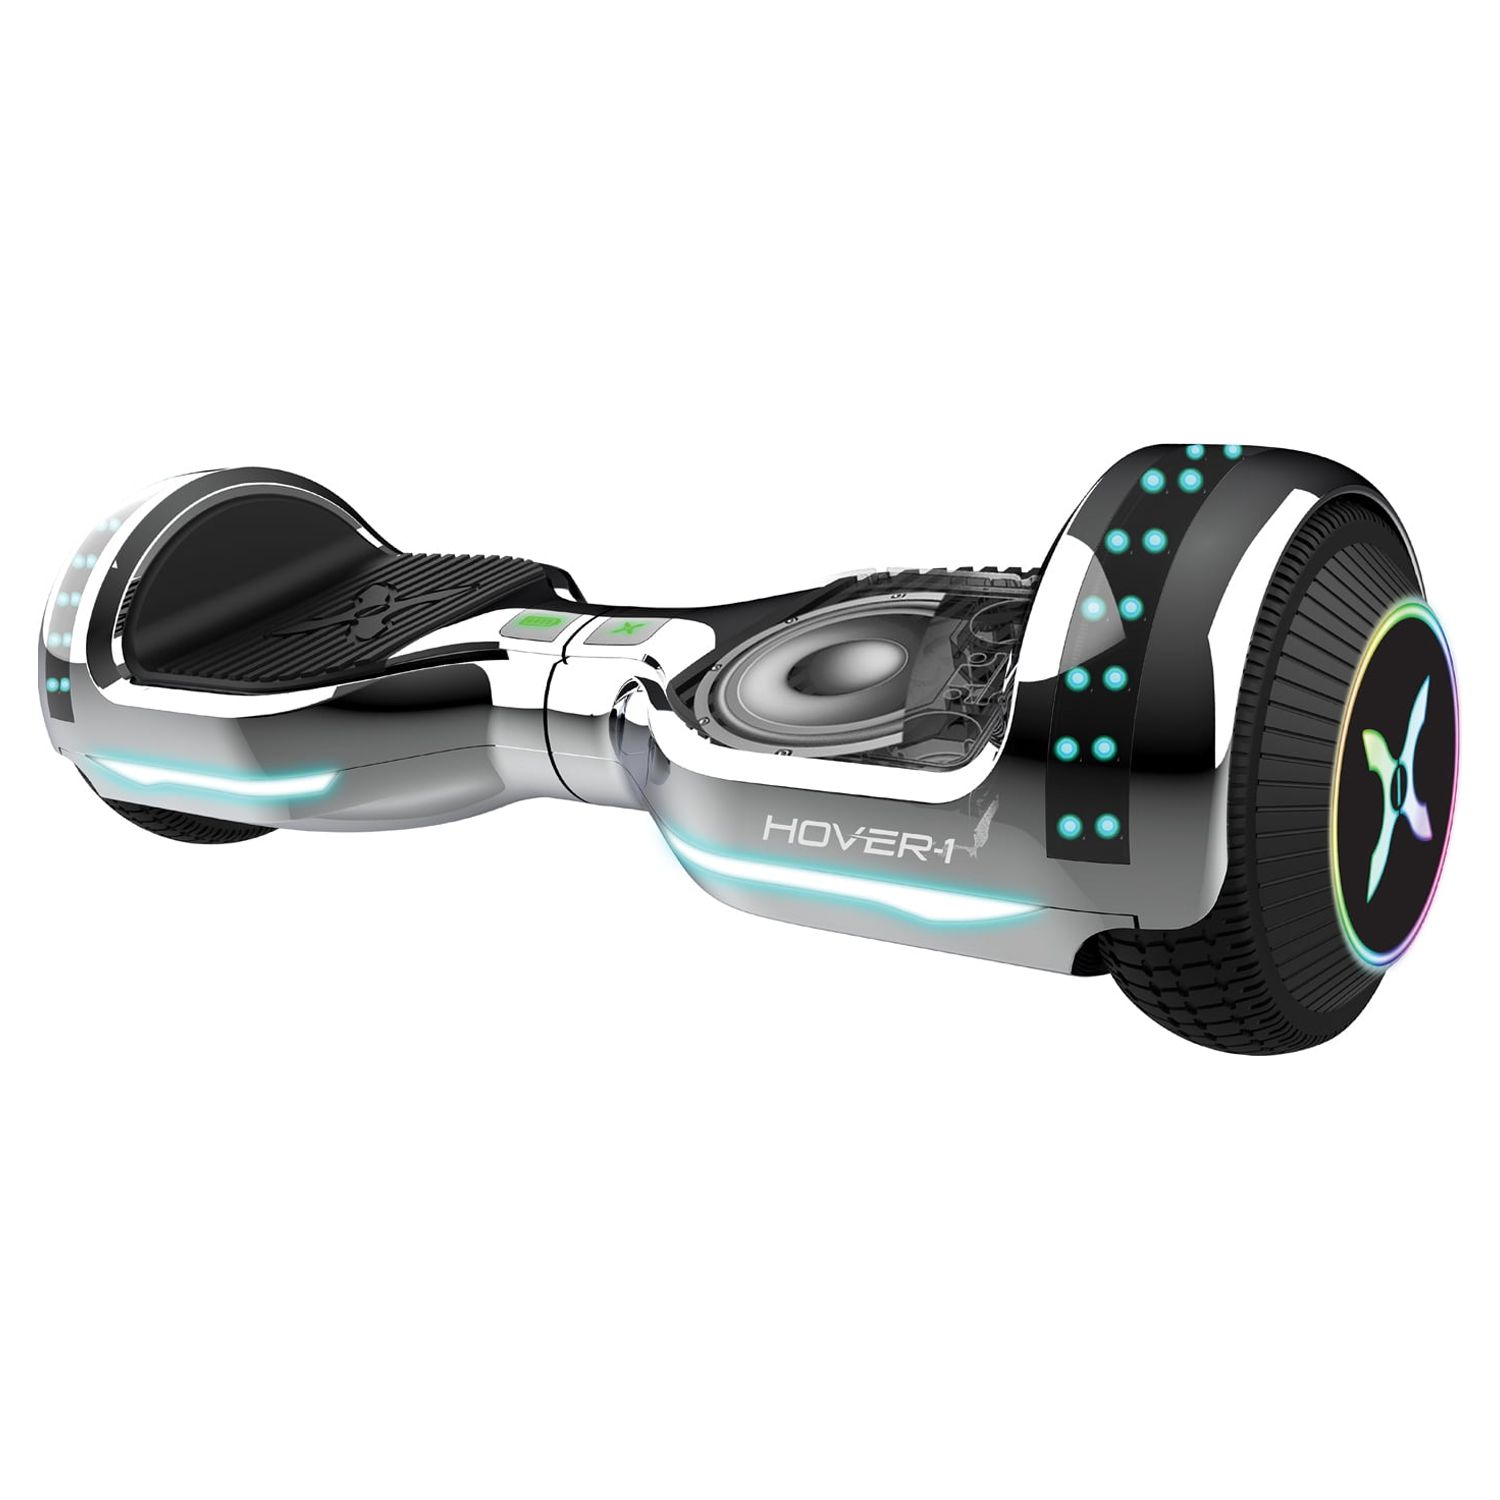 Hover-1 Matrix Hoverboard For Teens, 6.5 in Wheels, 180 lb Maximum Weight, LED Lights & Bluetooth Speaker, Silver - image 3 of 12